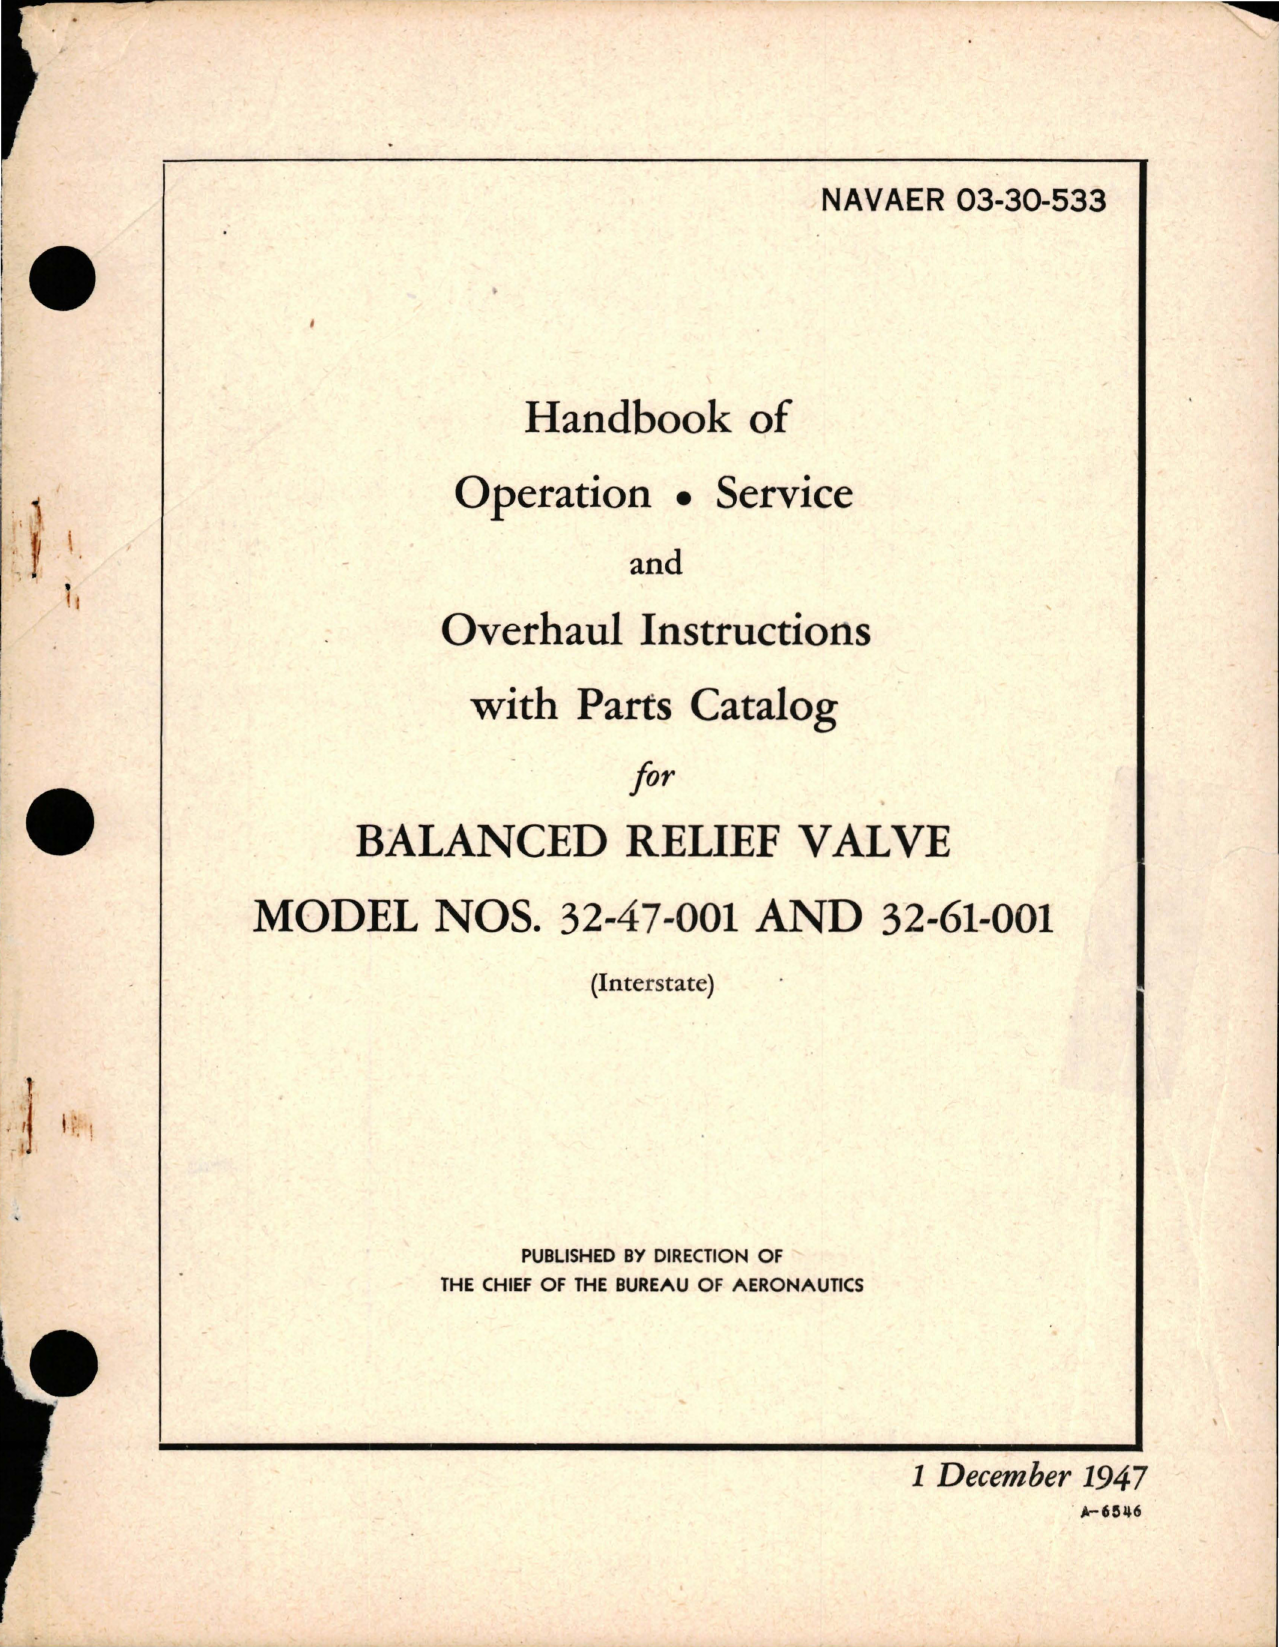 Sample page 1 from AirCorps Library document: Operation, Service and Overhaul Instructions with Parts Catalog for Balanced Relief Valve - Models 32-47-001 and 32-61-001